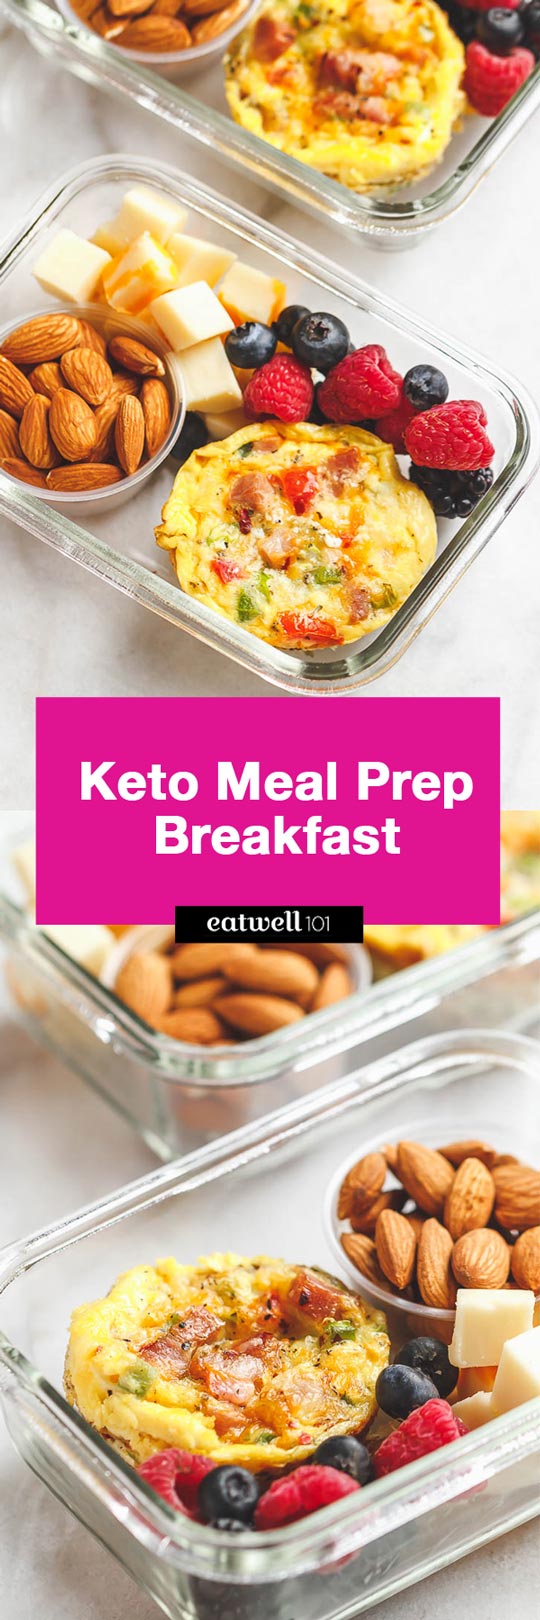 Easy Keto Meal Prep Breakfast - #keto #breakfast #recipe #eatwell101 - Packed with protein and so convenient for busy mornings, this is the perfect make-ahead option for on the go.